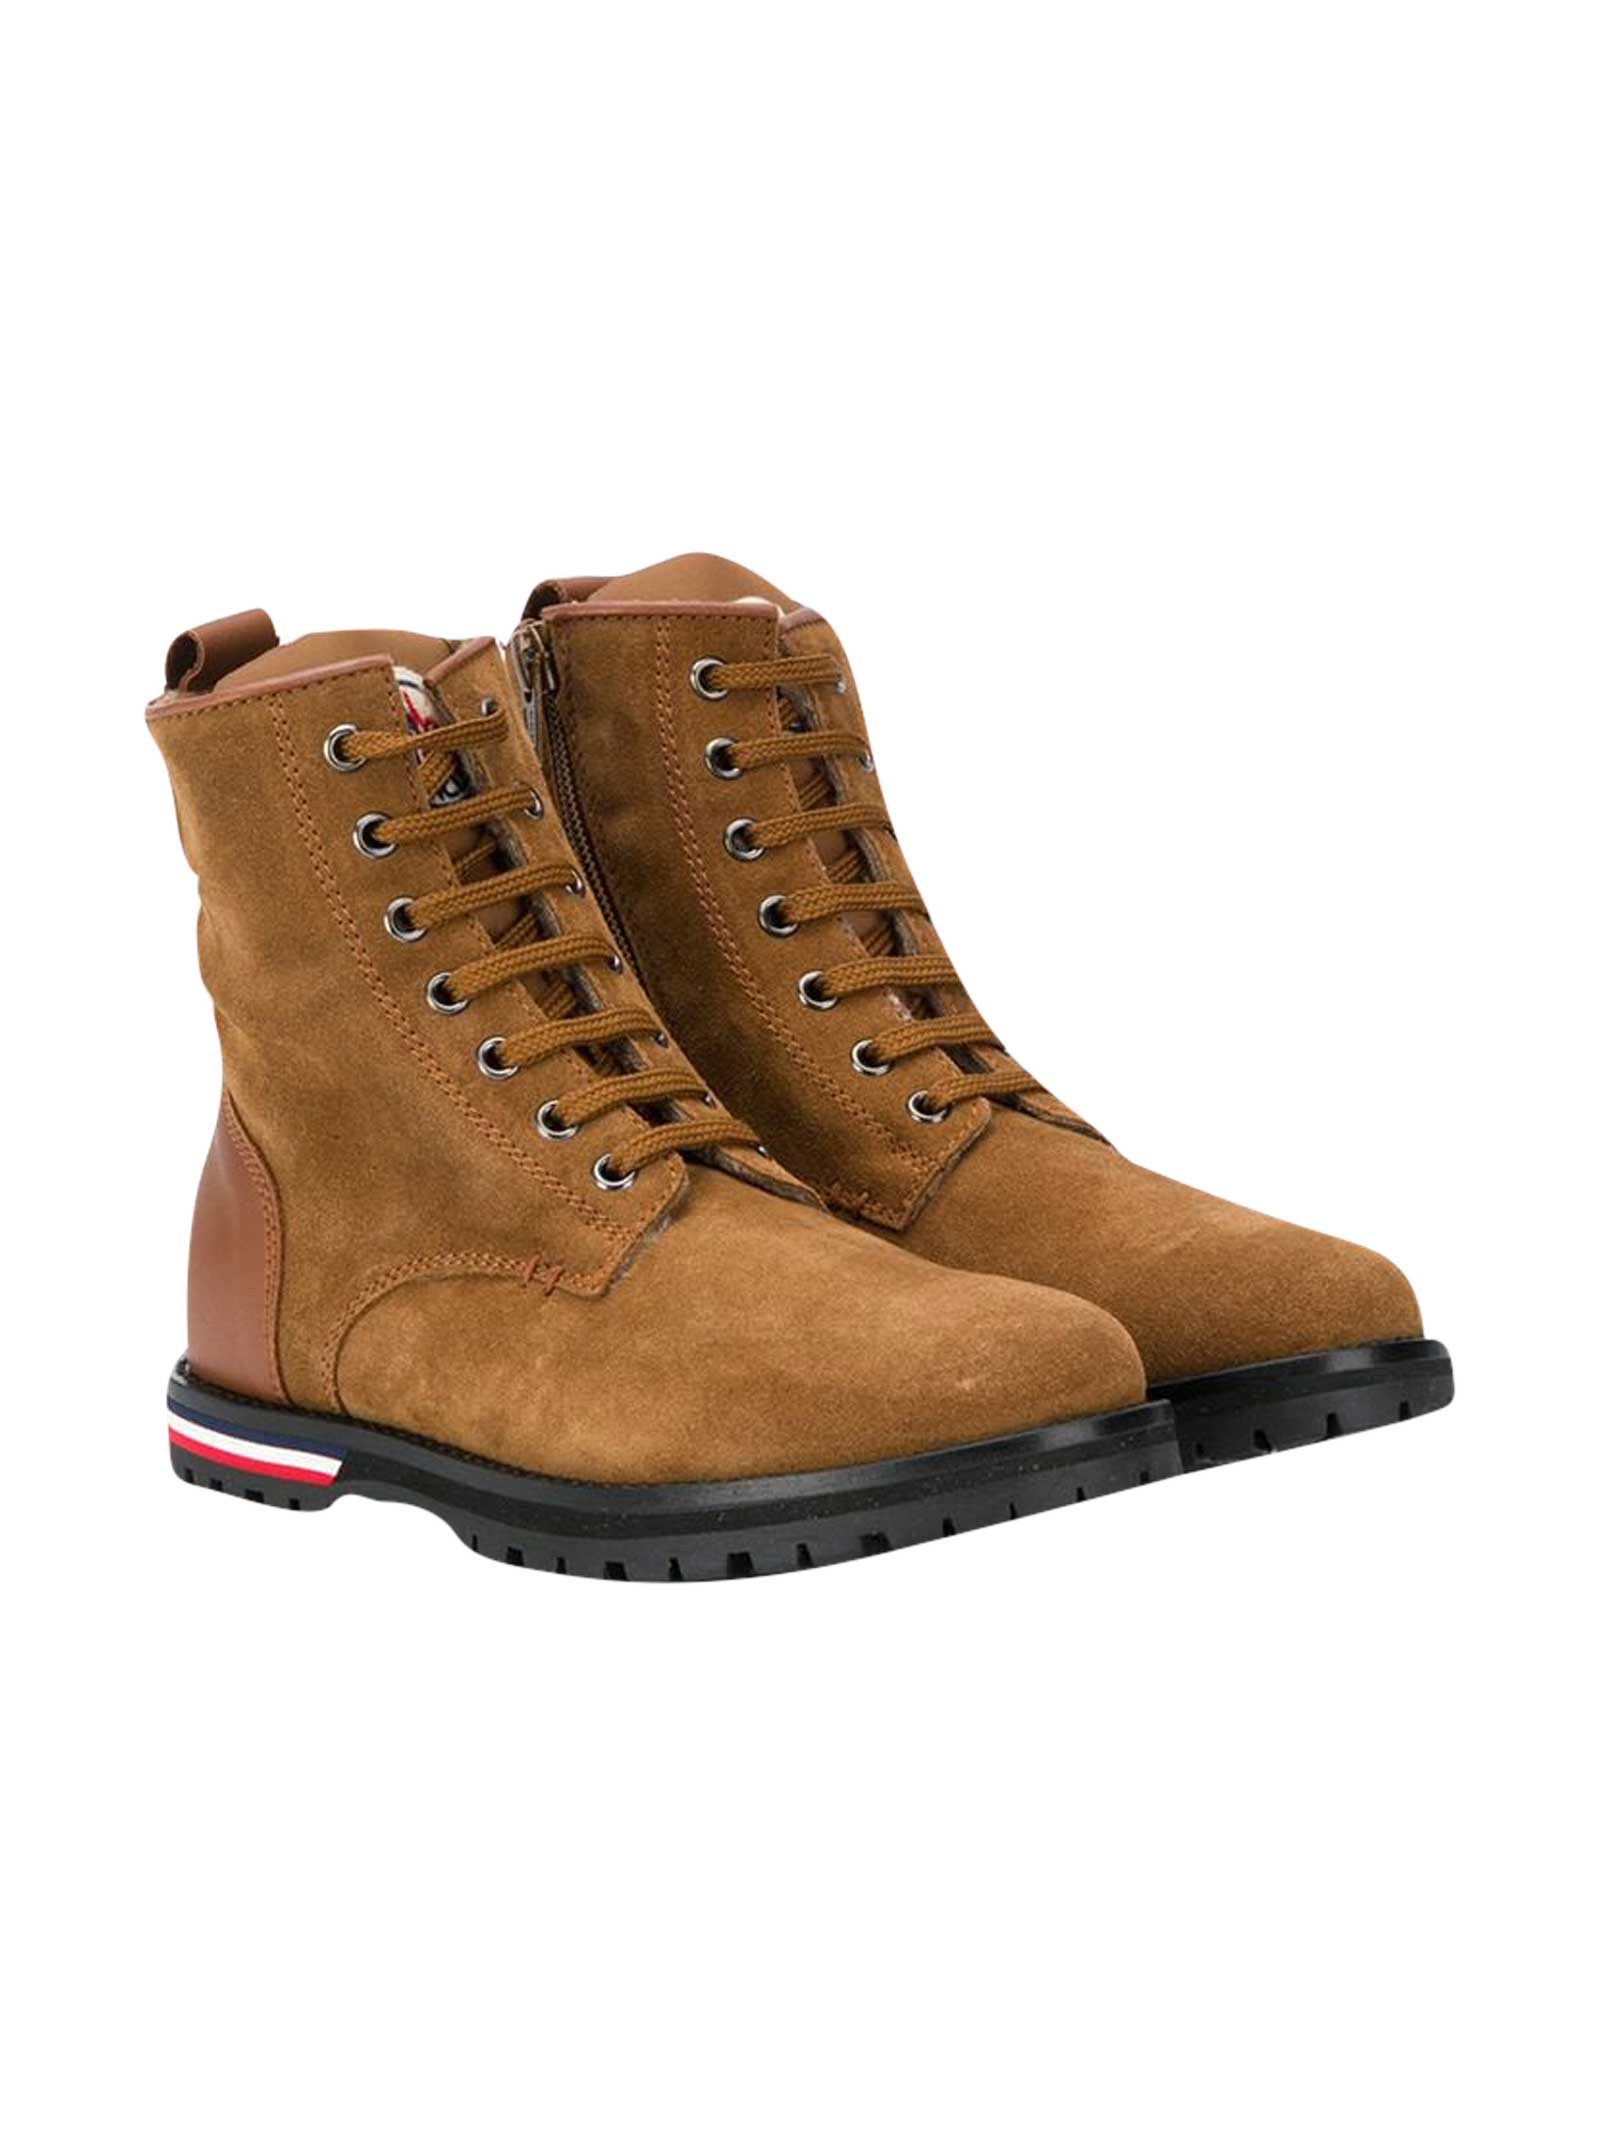 Buy Moncler Lace-up Ankle Boots online, shop Moncler shoes with free shipping